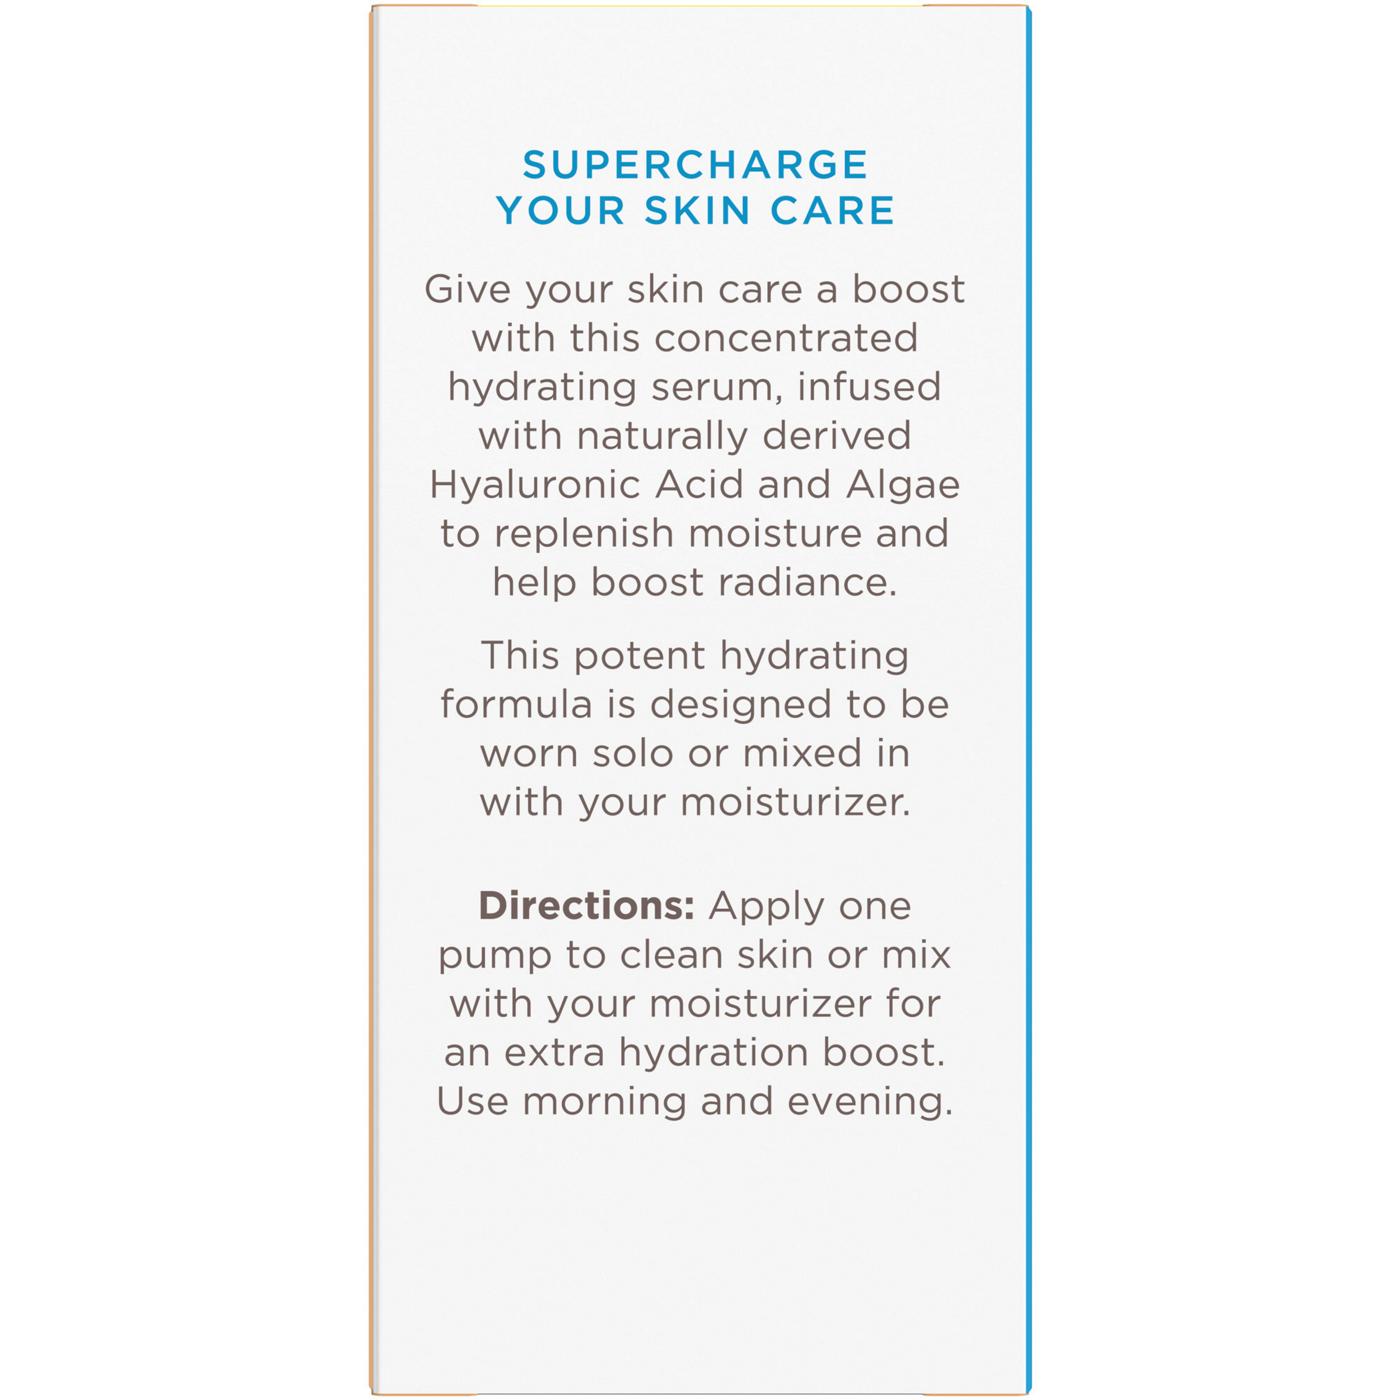 Burt's Bees Concentrated Hydrating Facial Serum - Hyaluronic Acid + Algae; image 4 of 7